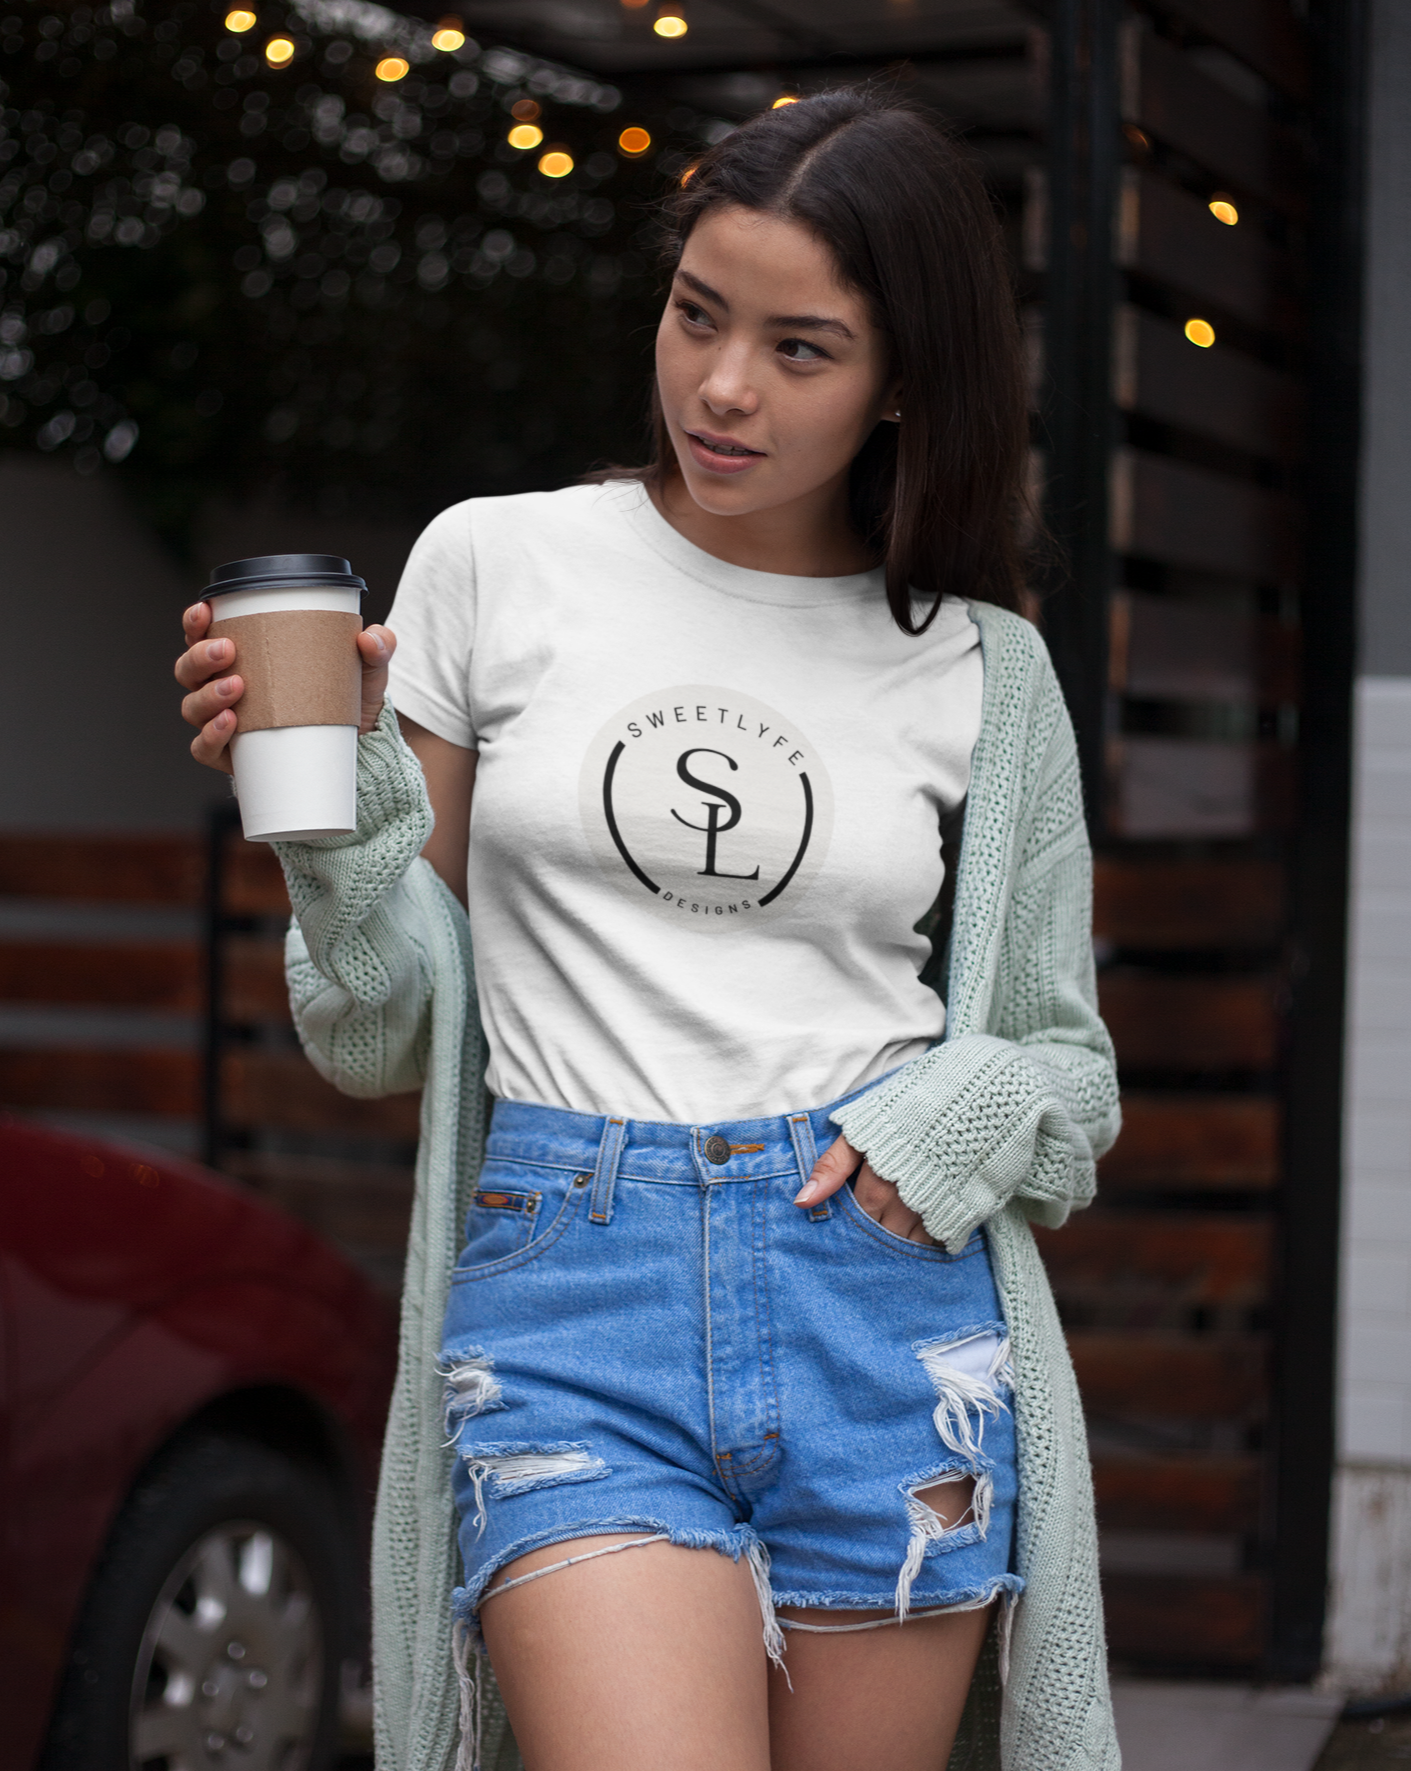 Welcome to the Sweet Lyfe, we are happy to see you here! This cotton t-shirt features our exclusive Sweet Lyfe design.  Made with a super soft cotton, you can stay comfortable while showing off your new favorite brand.